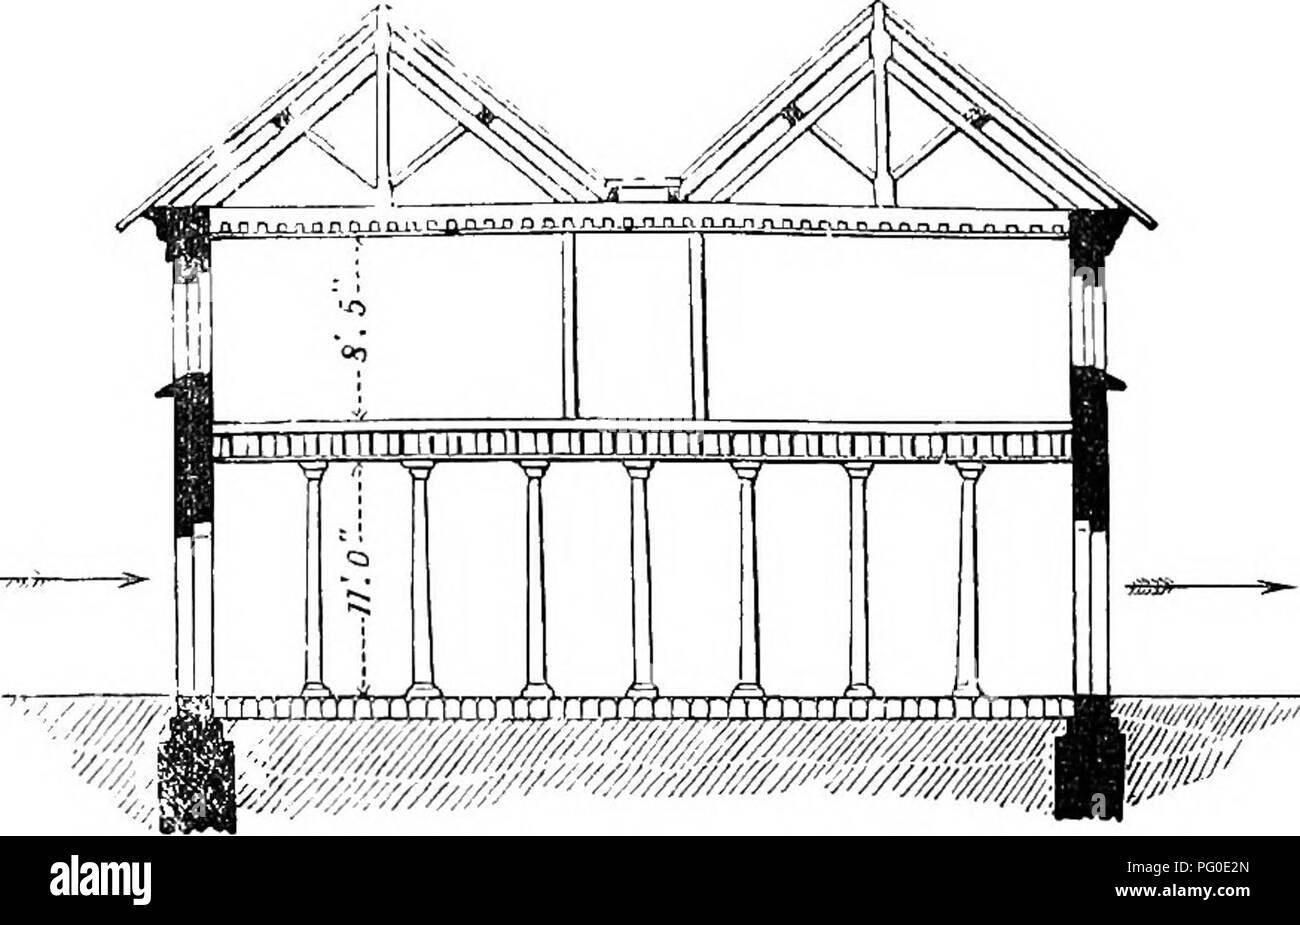 . A manual of veterinary hygiene. Veterinary hygiene. Fi&quot;. 23.—Transverse section of stable. Two horses are placed between opposite windows, heads to outer walls. The arrows indicate the direction of the wind. however, to work on the principle of inlets in the wall and outlets in the roof.. Fig. 24. —Transverse section of stable. Eight horses are placed between opiiosite windows, with their heads to dividing walls. The arrows indicate the direction of the wind. 6. Tubes or shafts either as inlets or outlets are generally to be avoided. Mechanical Ventilation. This may be defined as the me Stock Photo